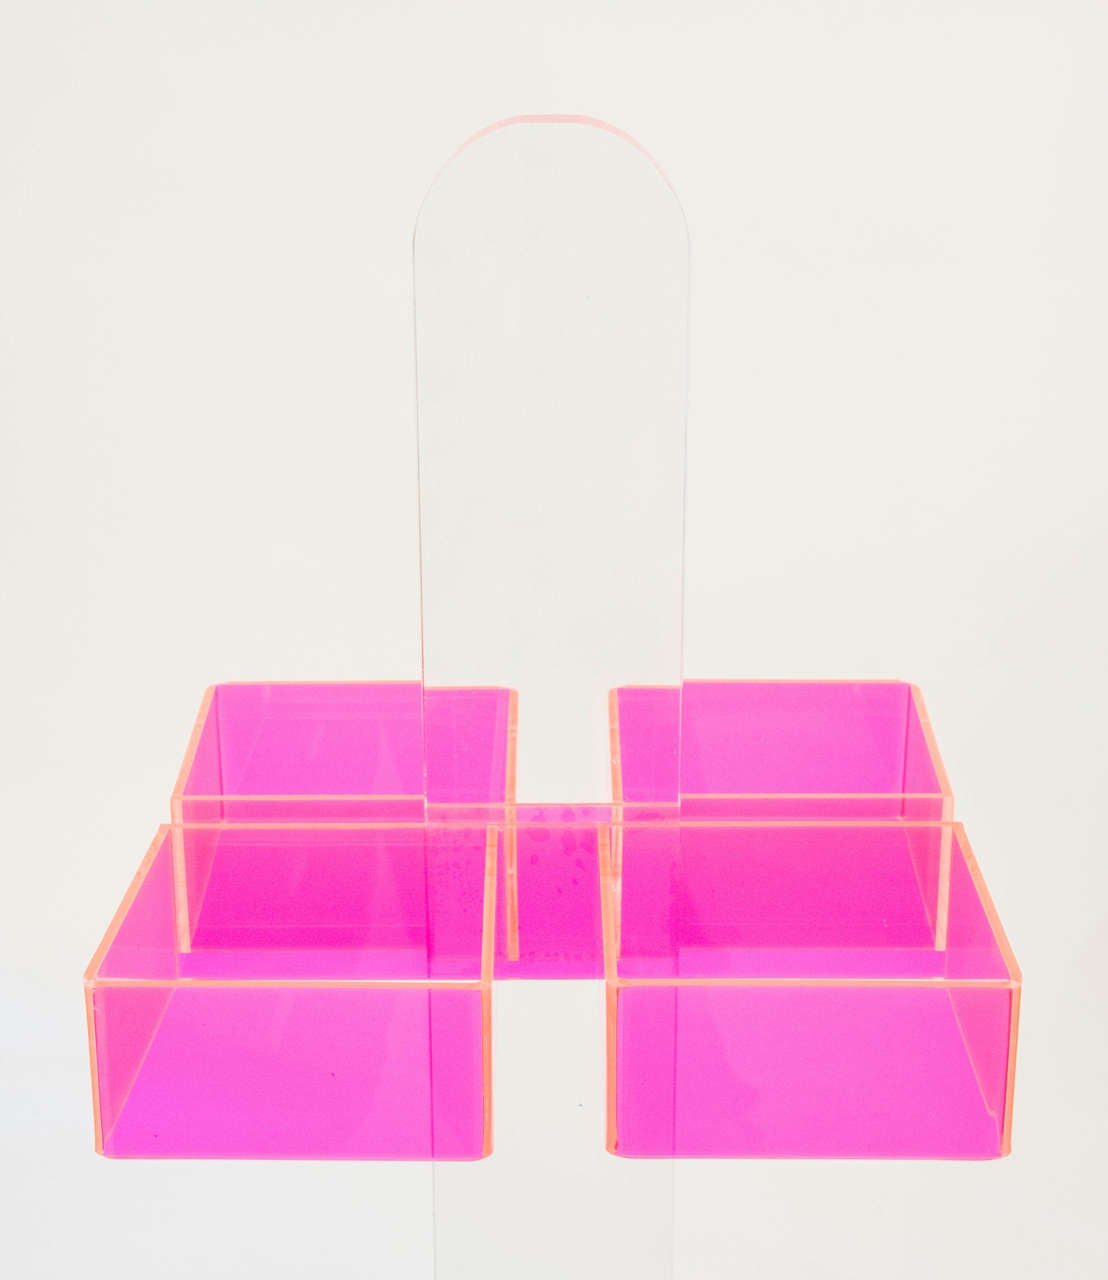 Hand-Crafted Lucite/Acrylic Umbrella Stands